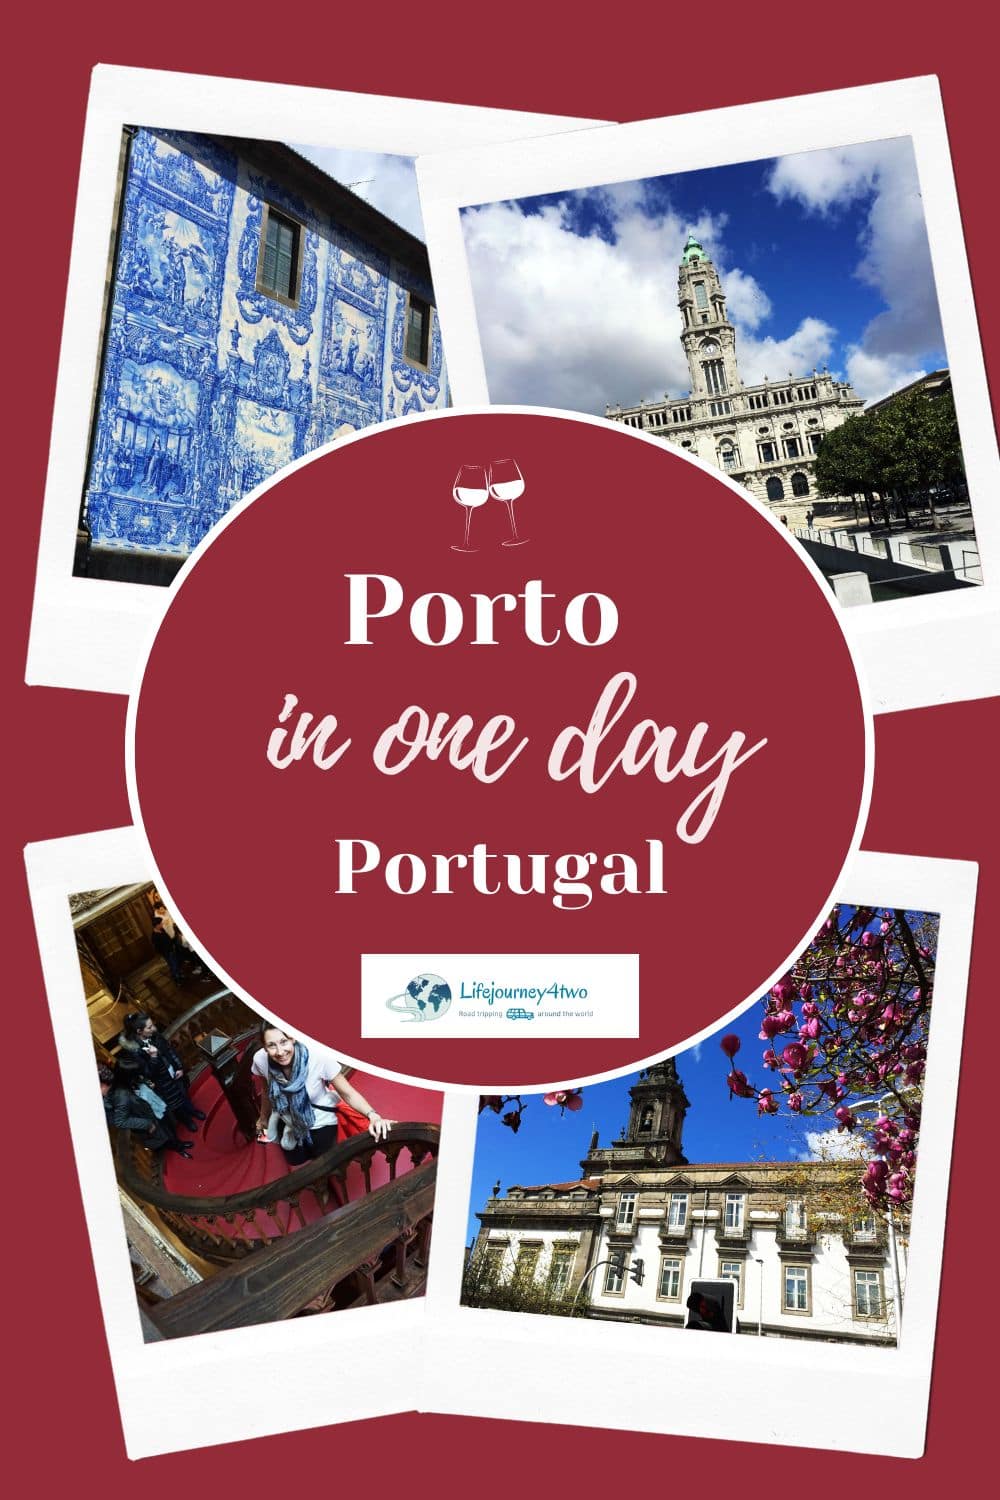 Porto in a day Pinterest pin